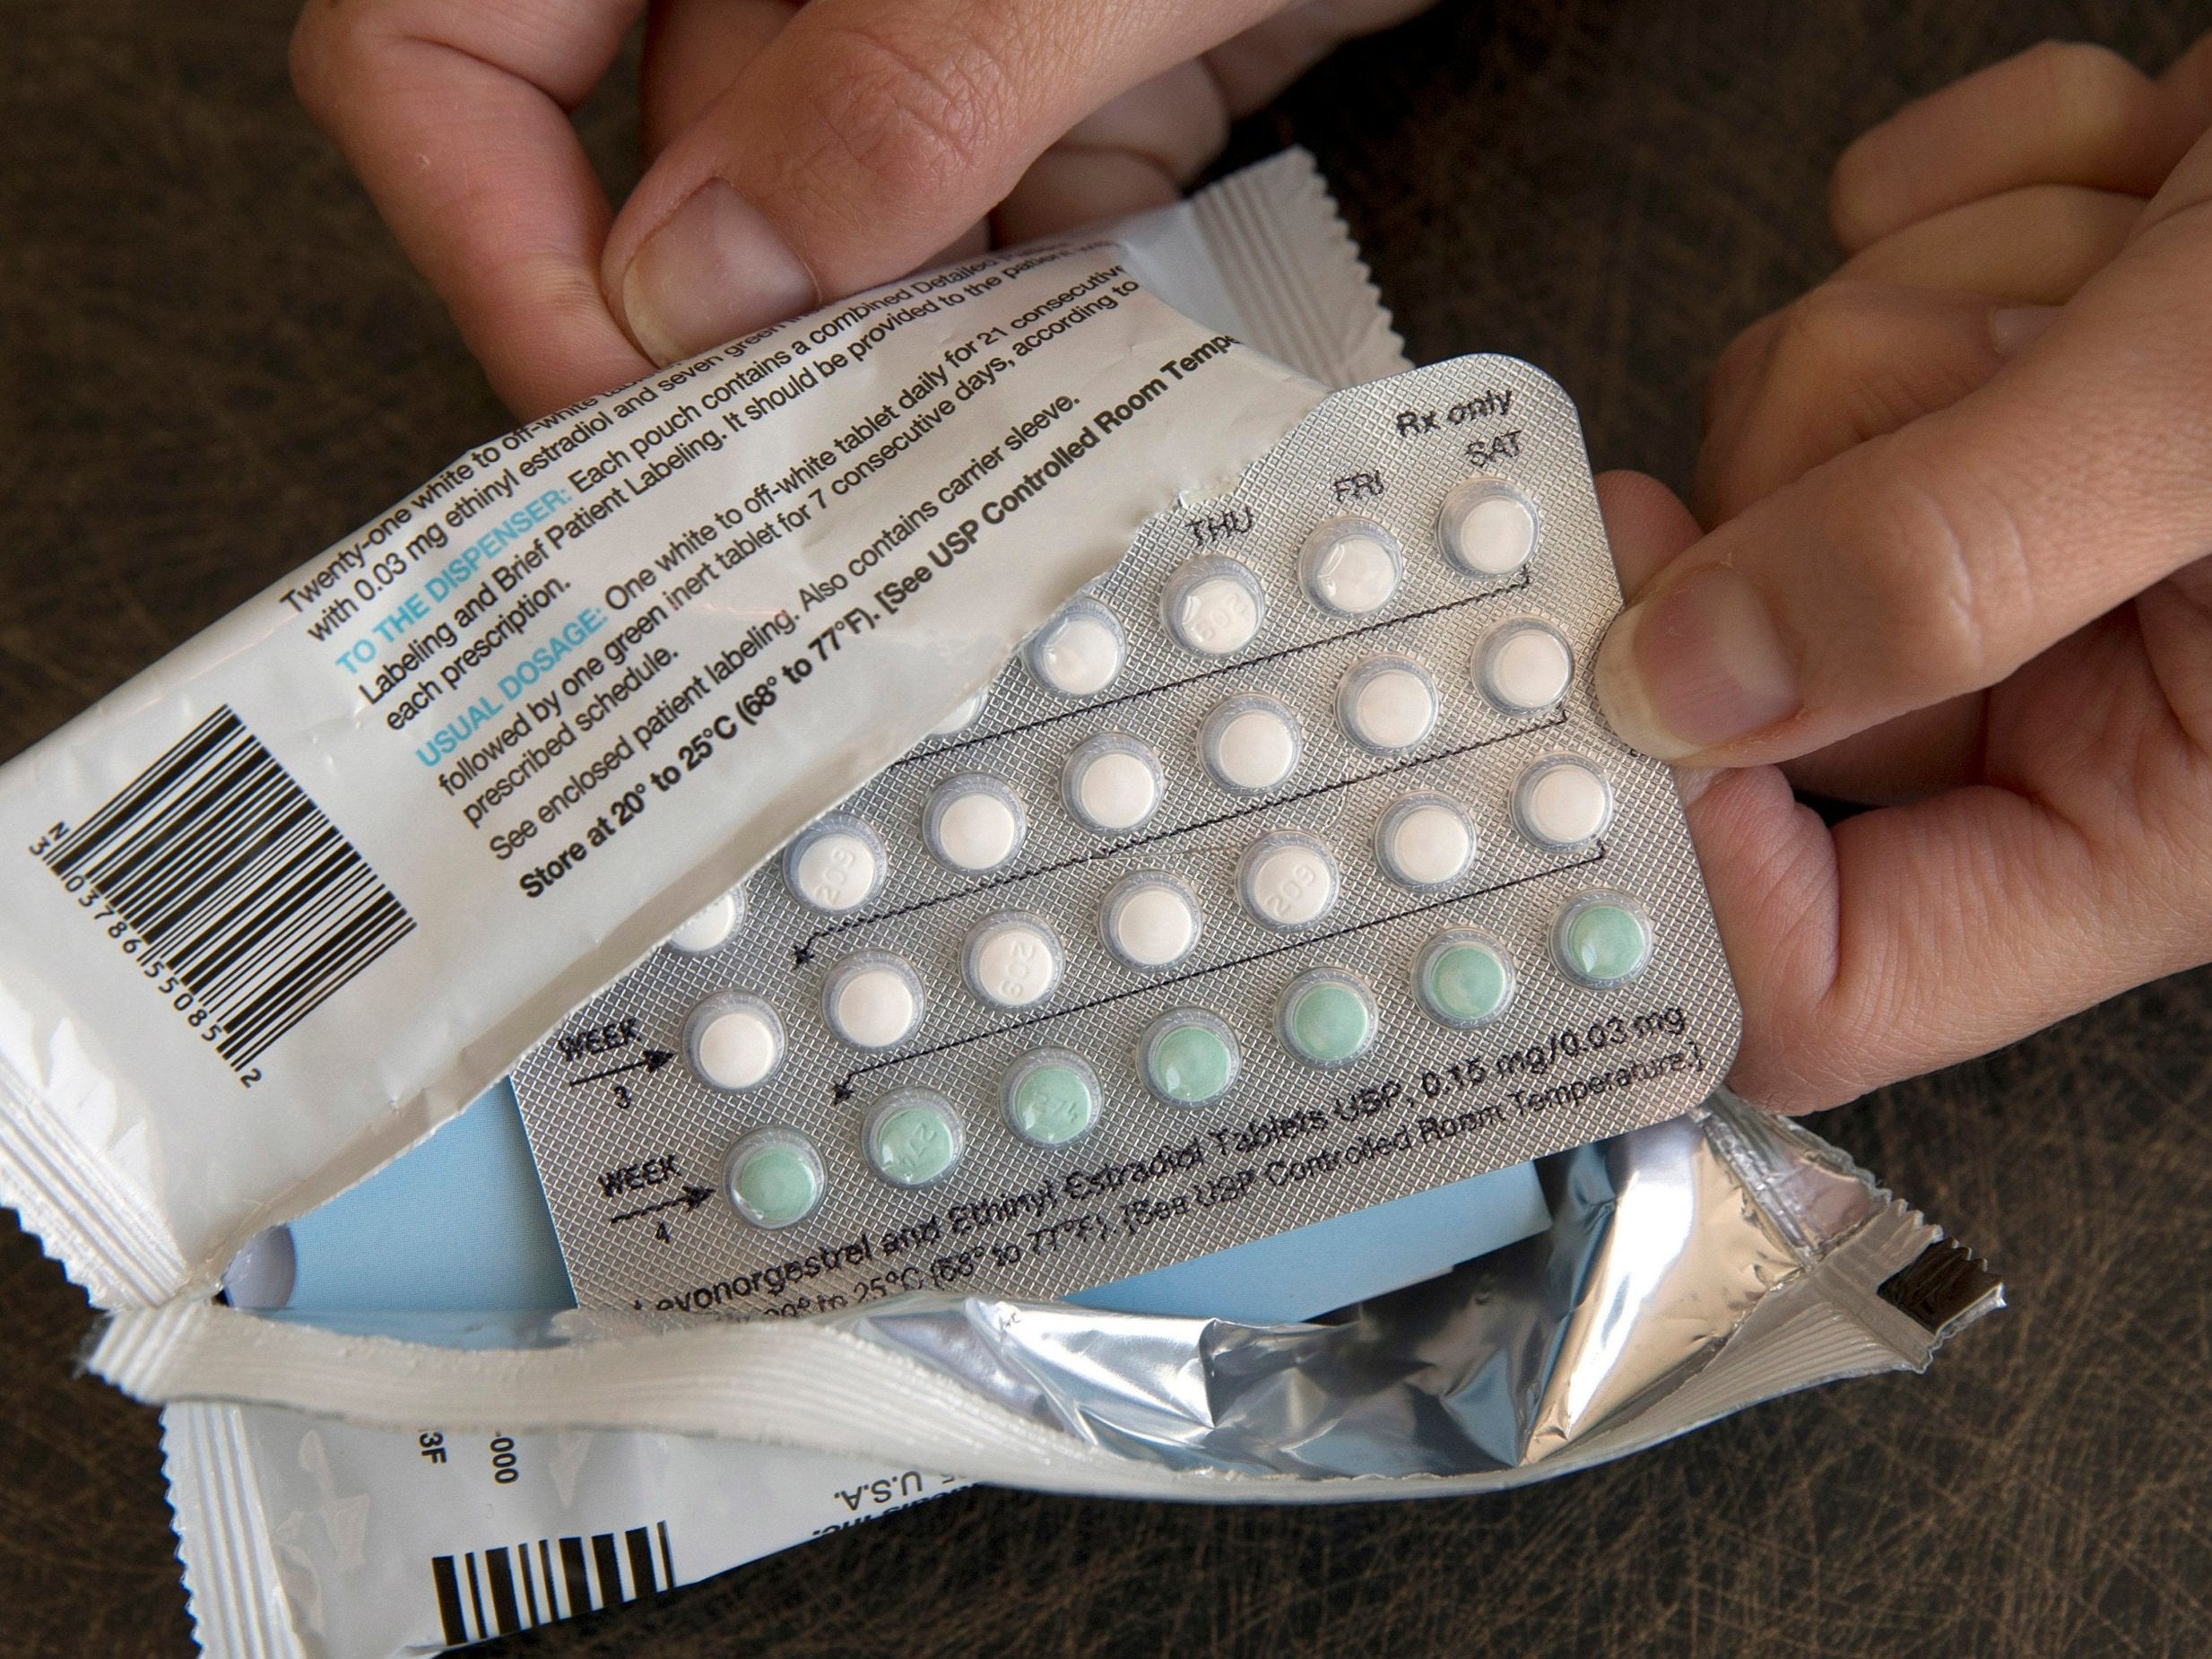 Donald Trump's administration has sought to introduce new rules which exempt some employers from providing free birth control to female employees